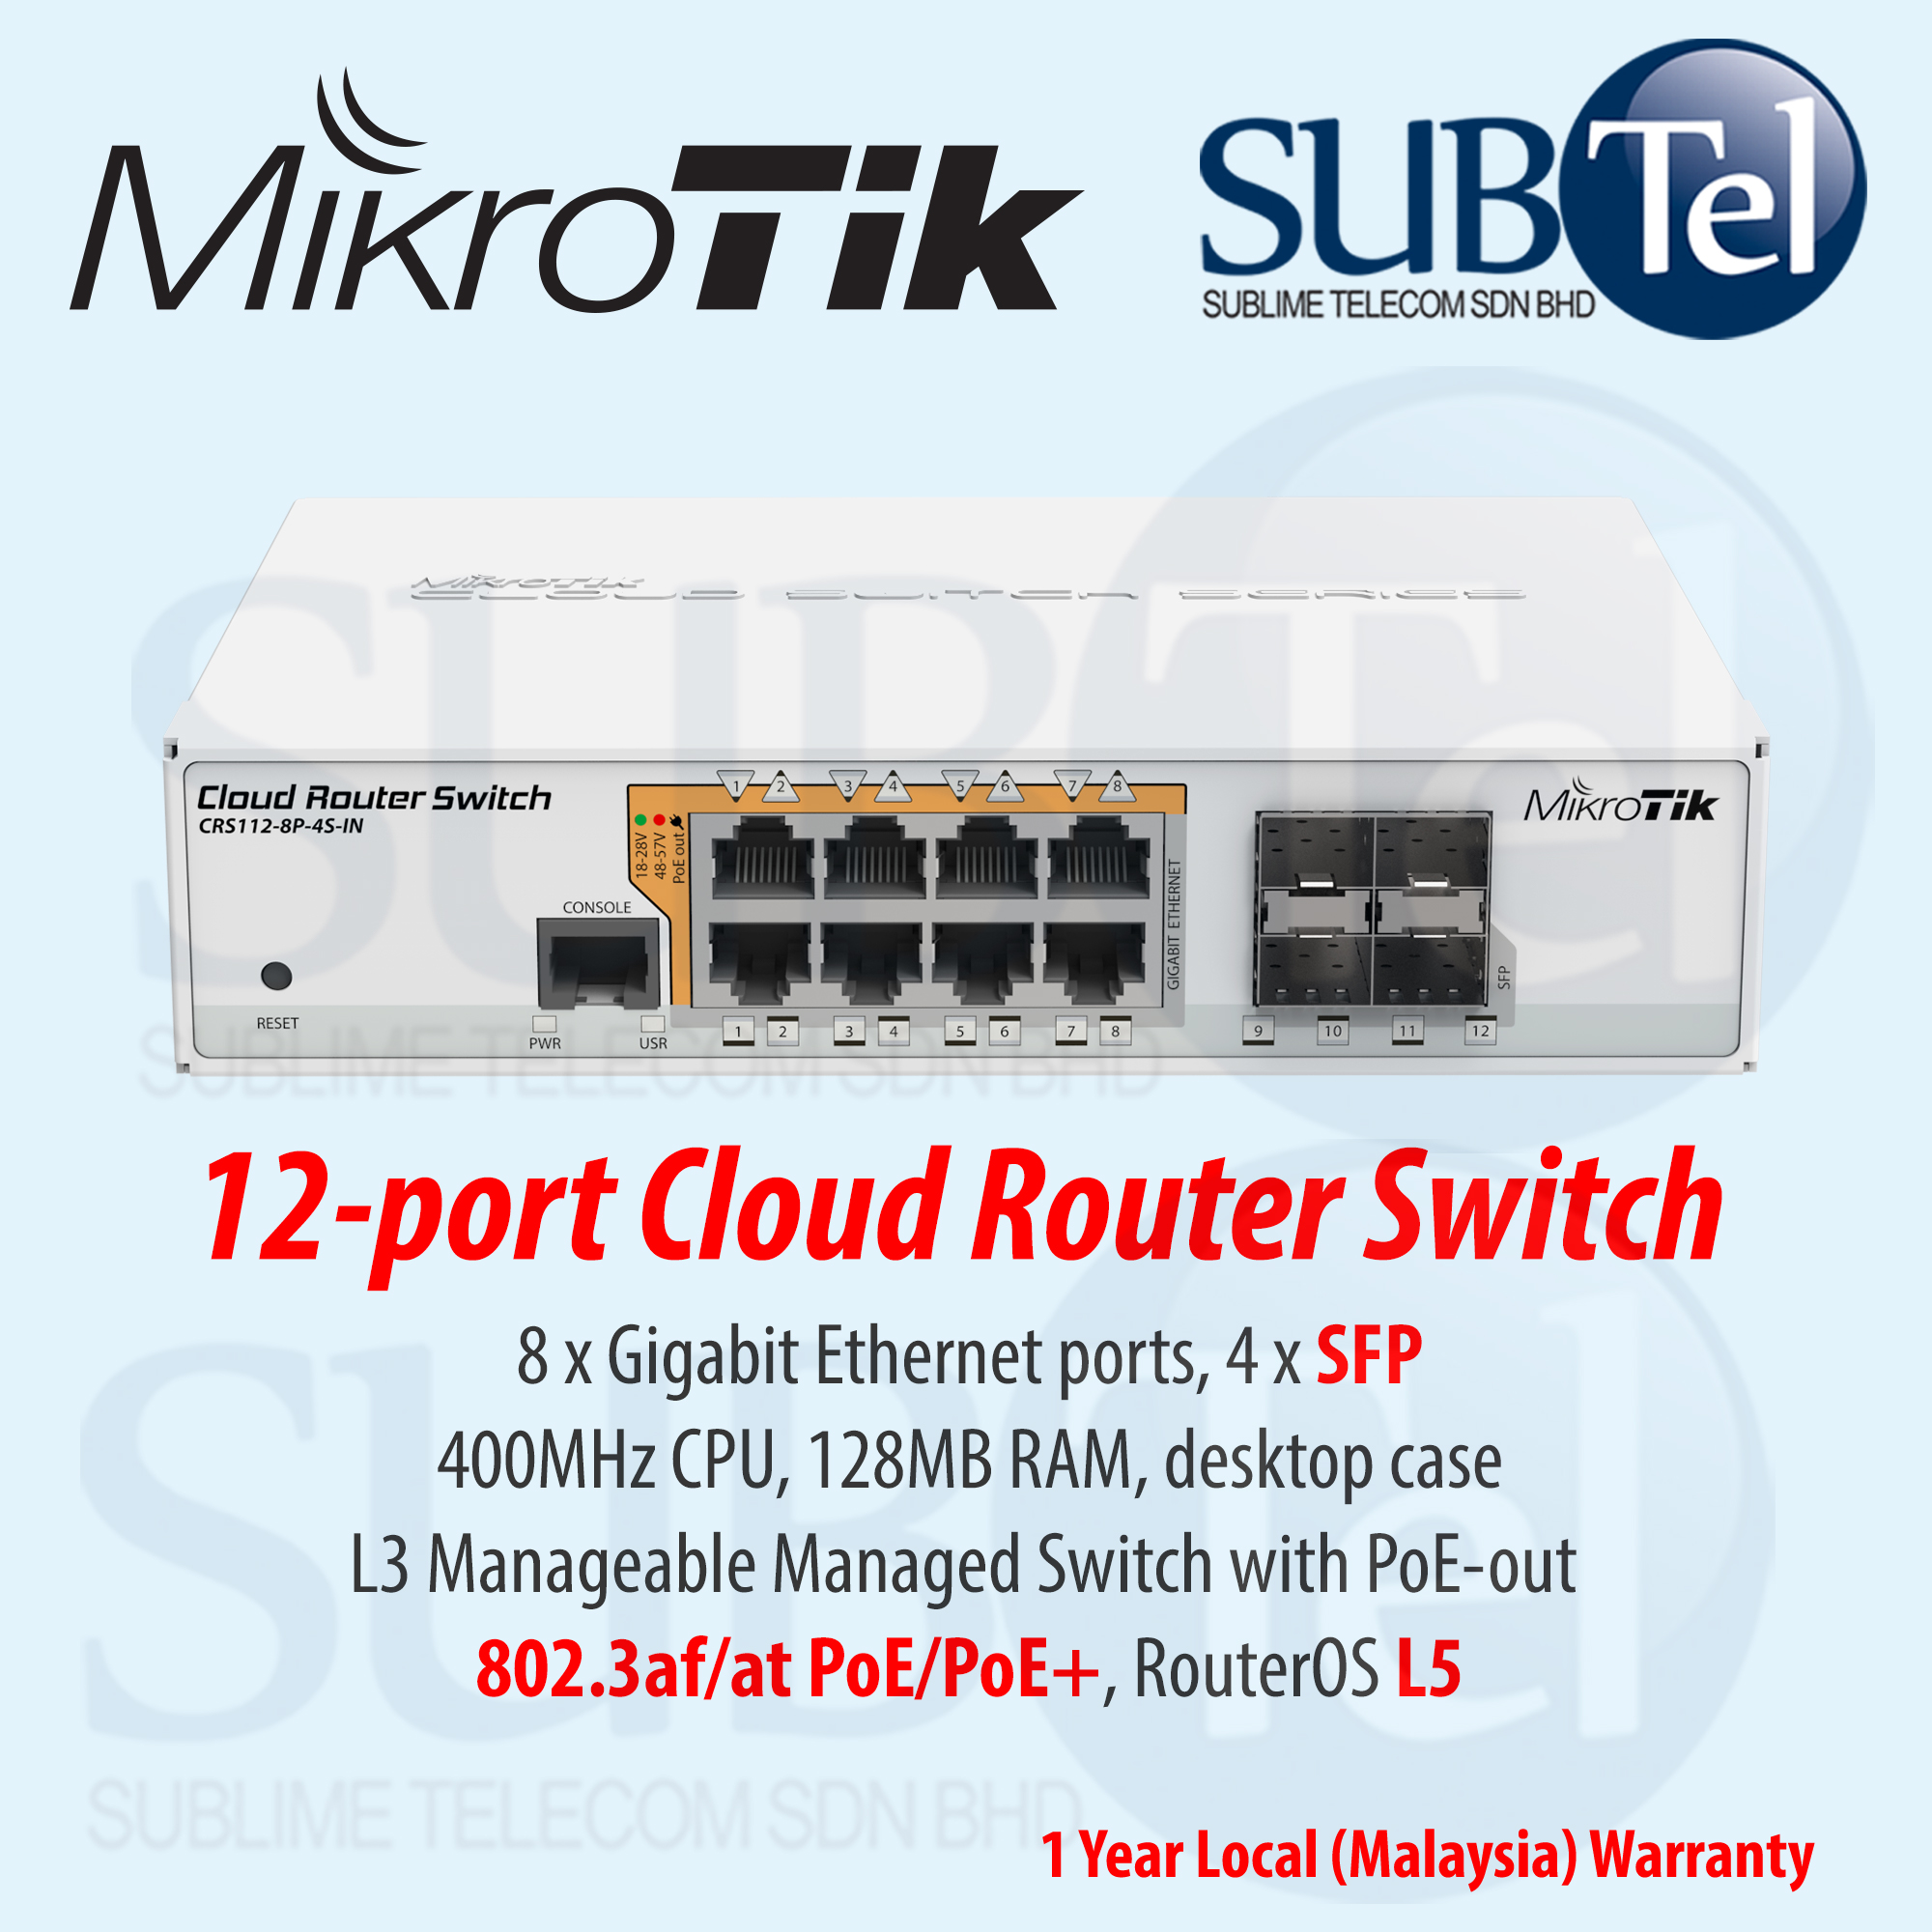 MikroTik Gigabit Ethernet Smart Switch with PoE-out and RouterOS L5 CRS112-8P-4S-IN 